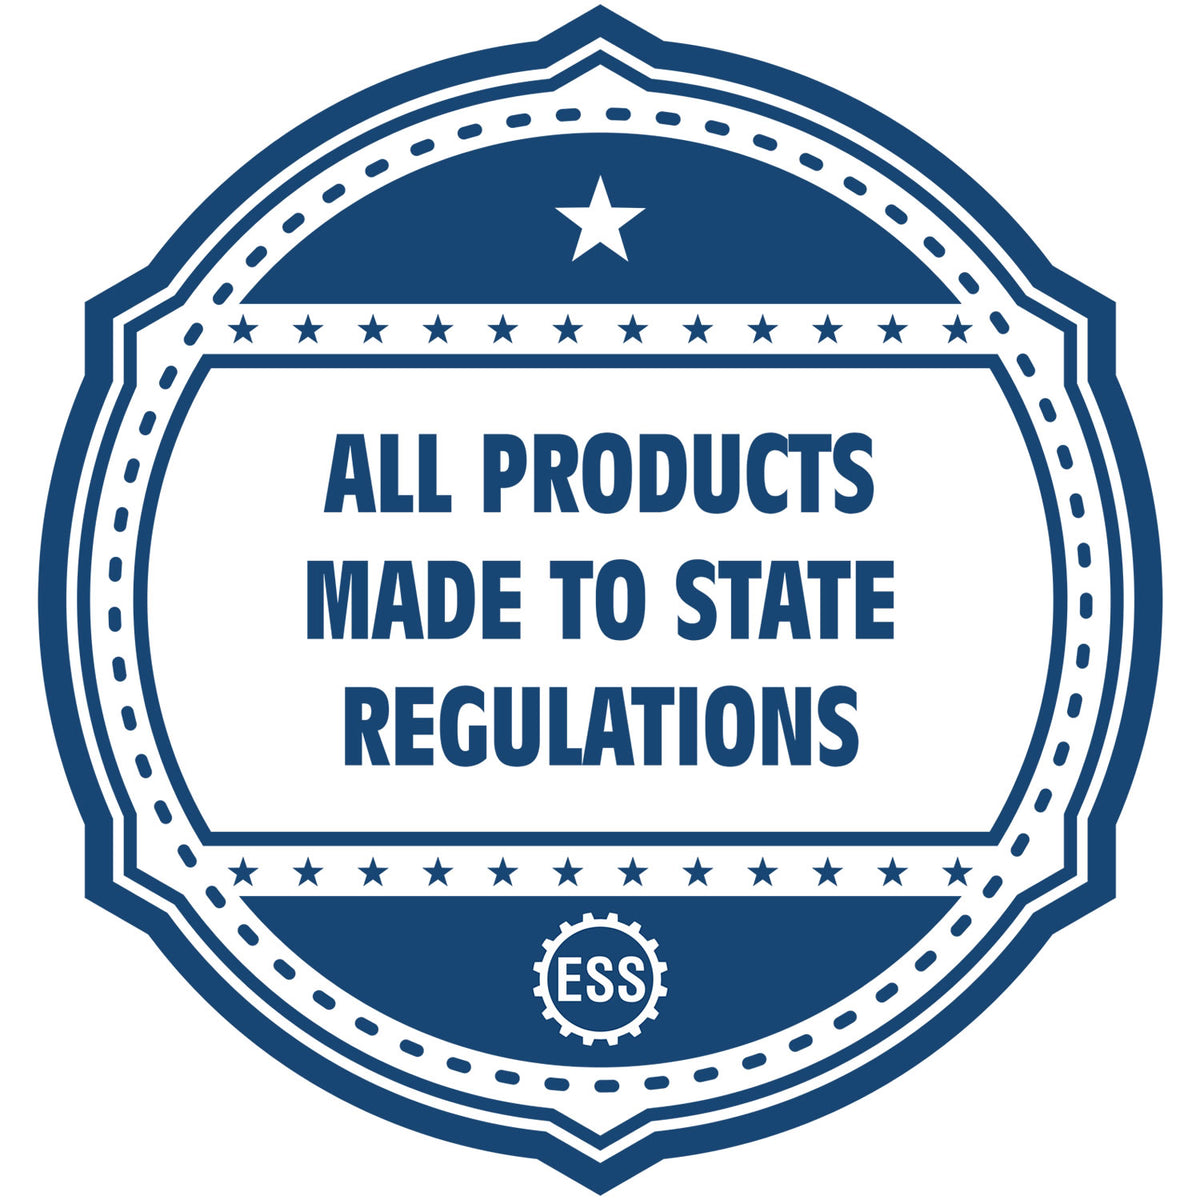 An icon or badge element for the Self-Inking Rectangular South Dakota Notary Stamp showing that this product is made in compliance with state regulations.